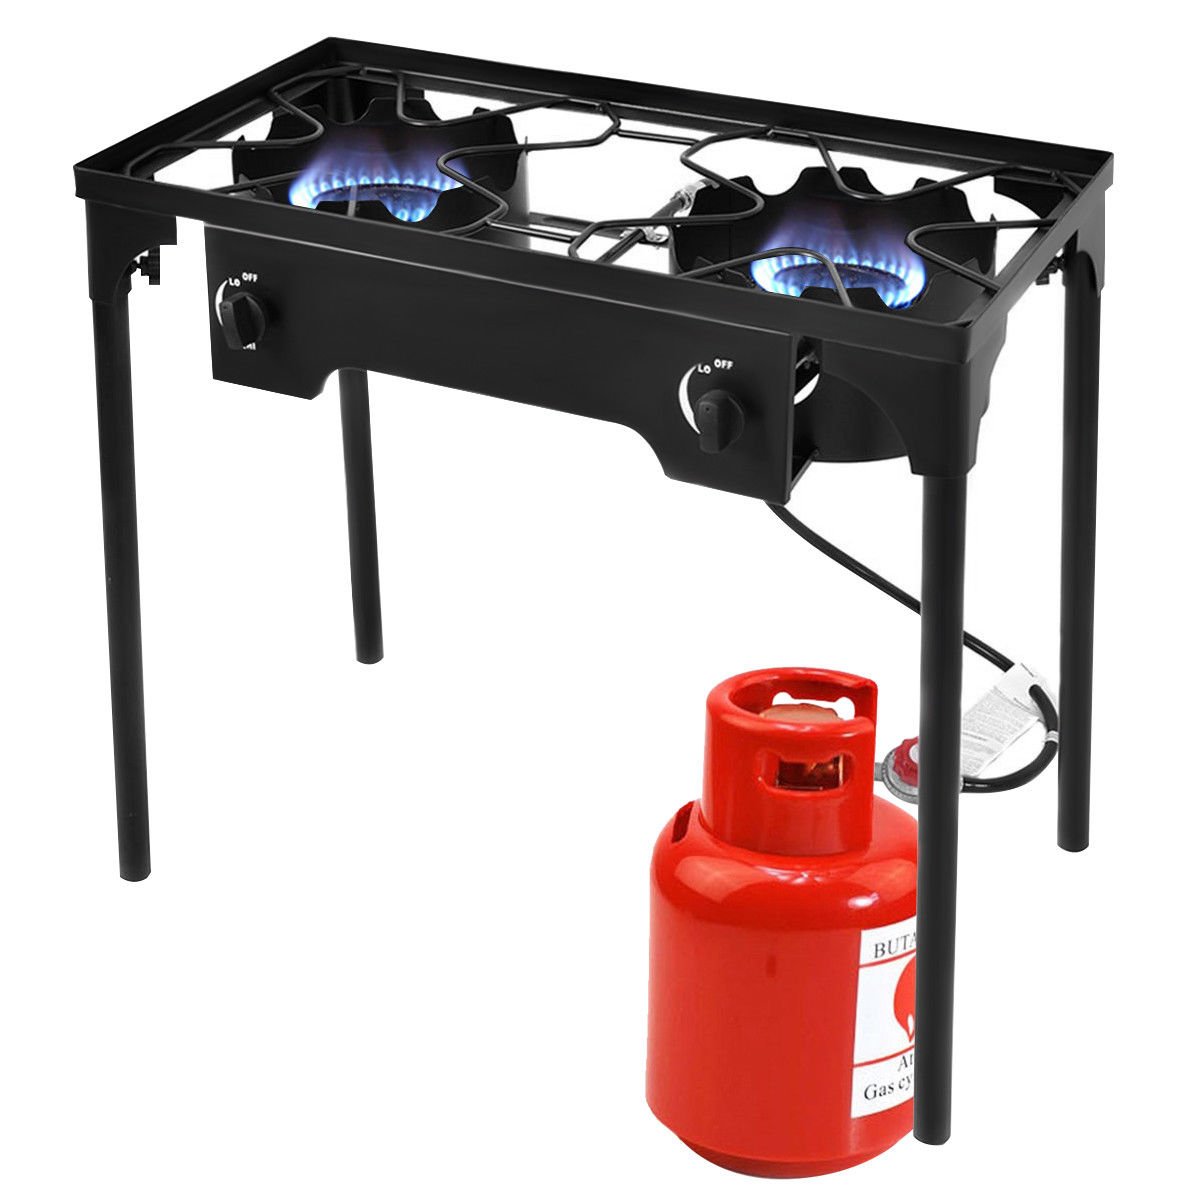 Costway Double Burner Gas Propane Cooker Outdoor Picnic Stove Stand BBQ Grill - image 3 of 10